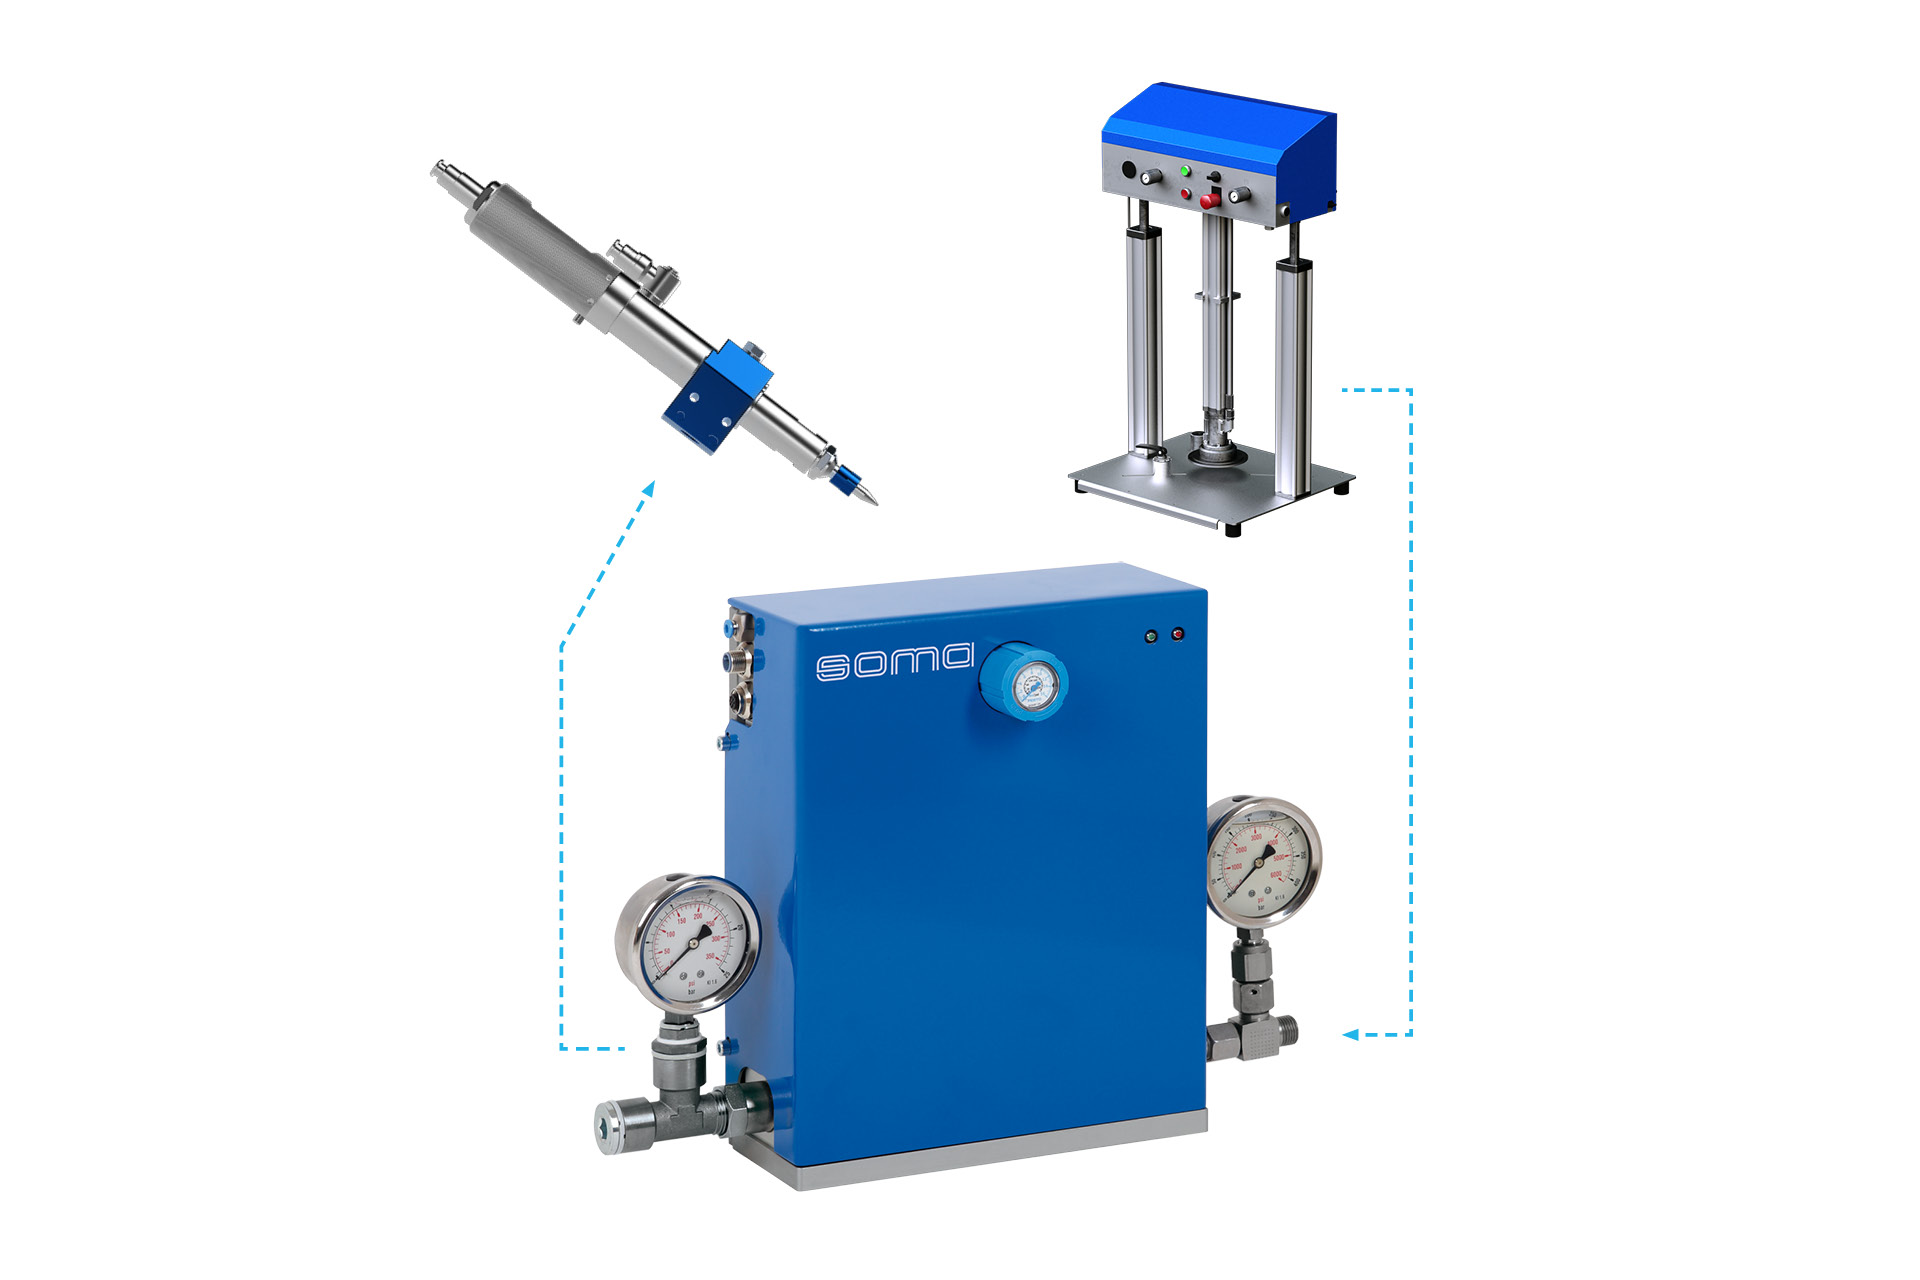 The patented DAS 120/12 pressure balance system from SOMA limits the high delivery pressure in supply systems for industrial greases and highly viscous liquids.